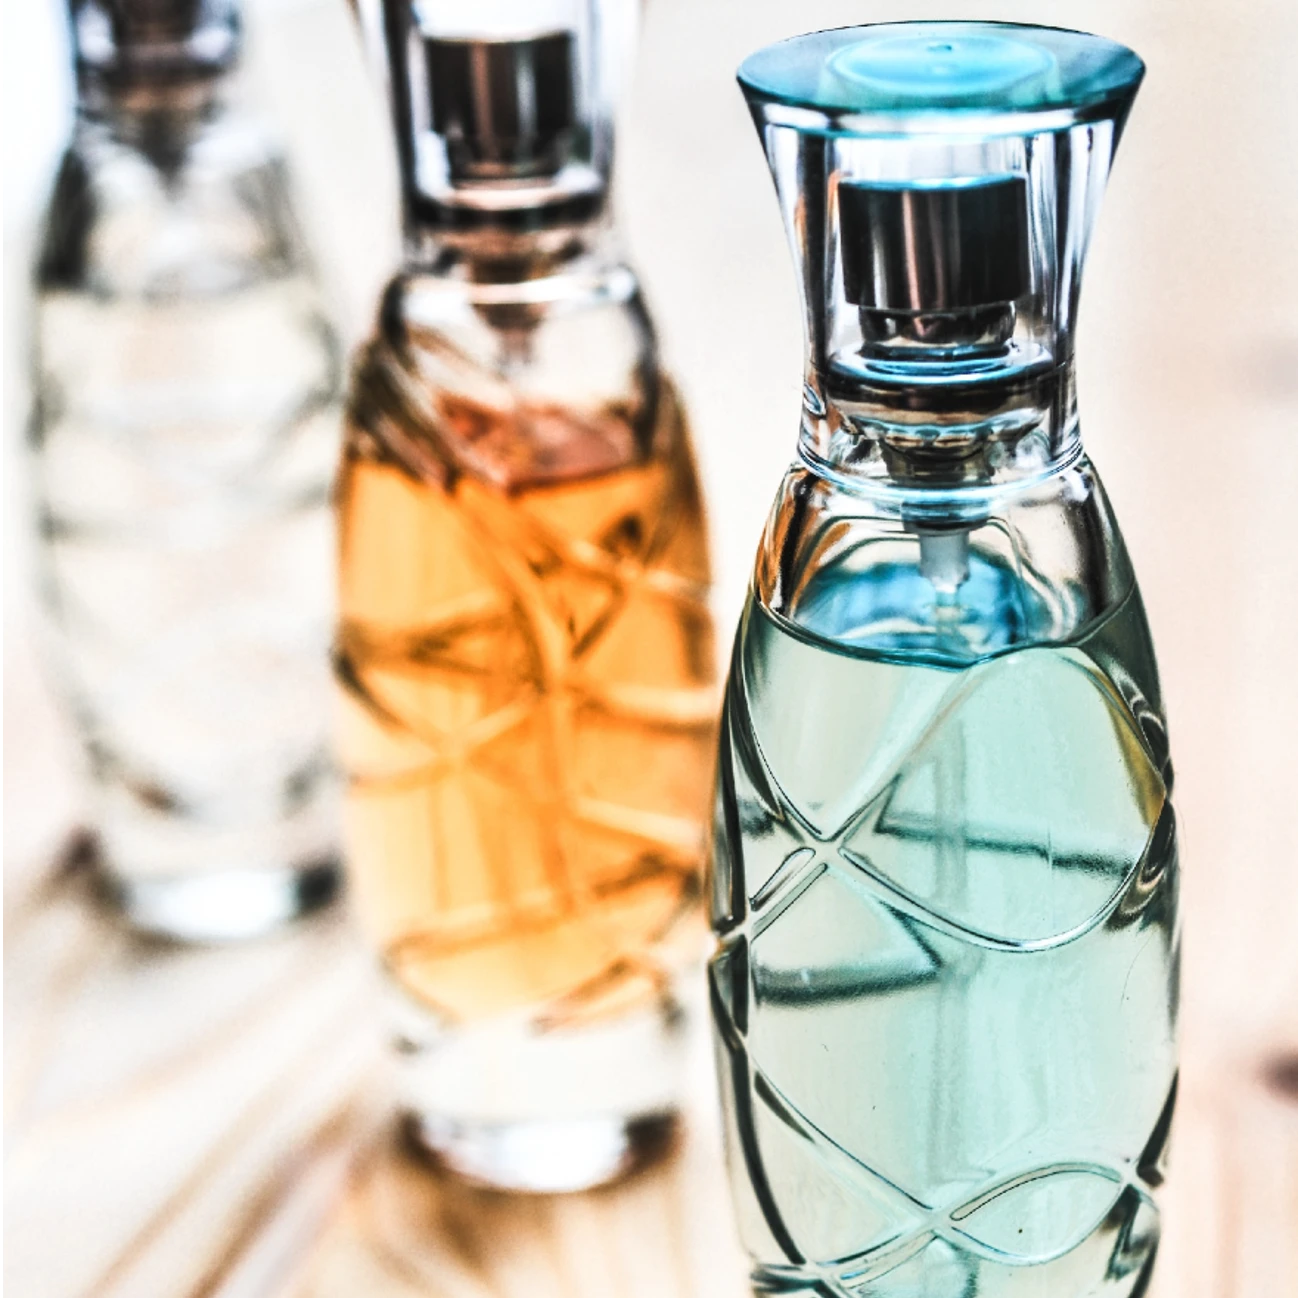 The Art of Perfumery: Finding Your Signature Scent